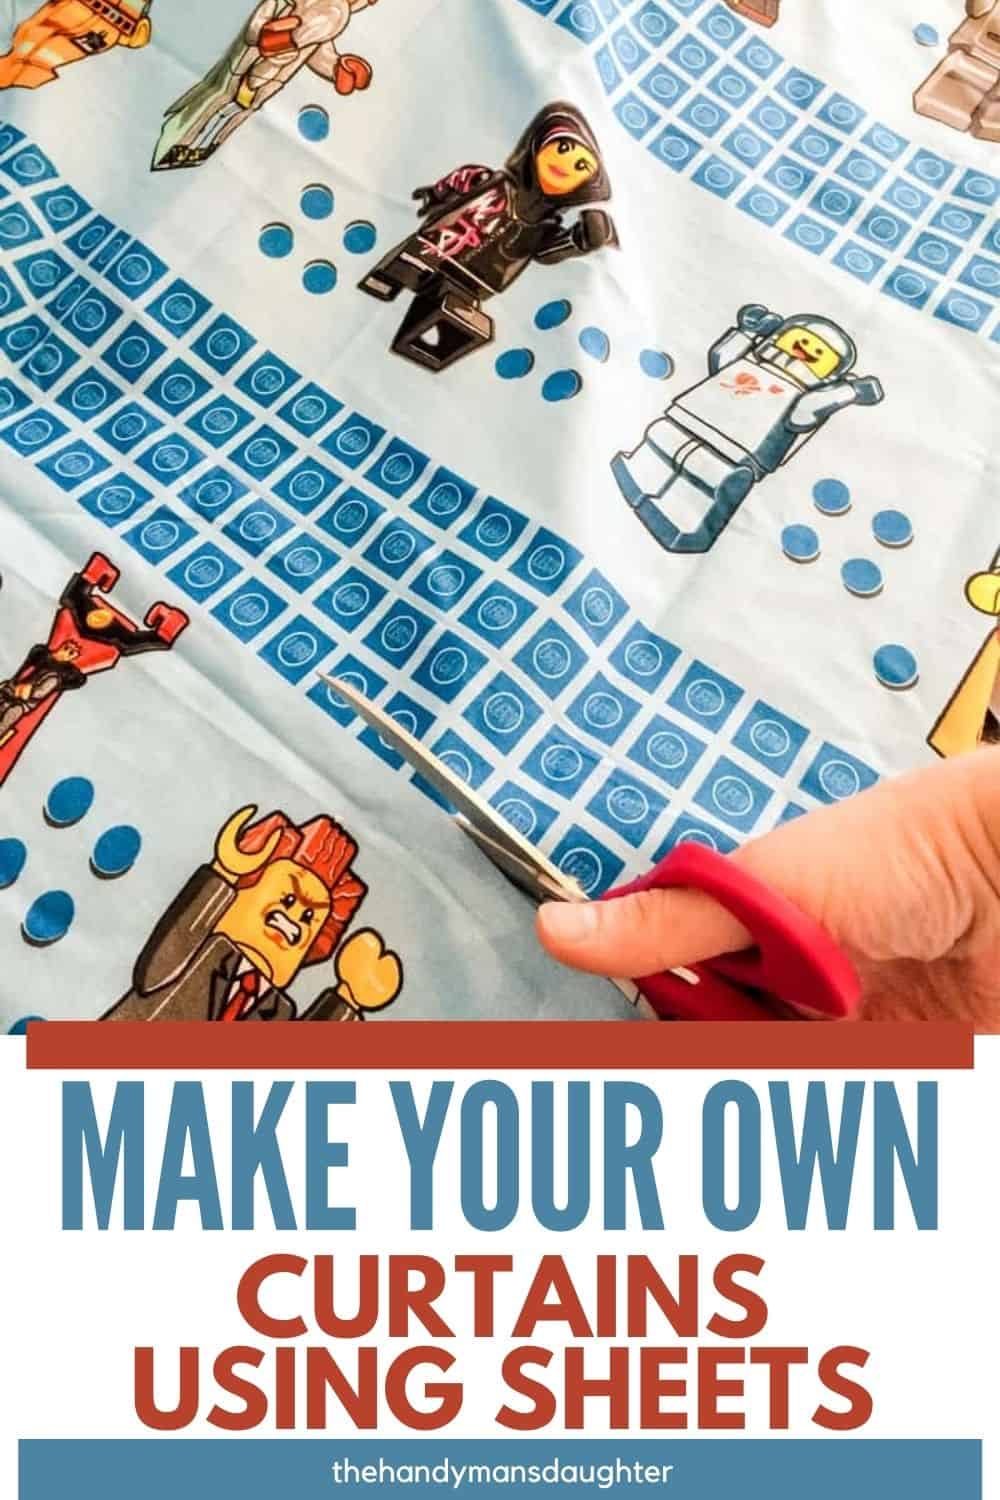 cutting sheets to make curtains with text overlay " Make your own curtains using sheets"